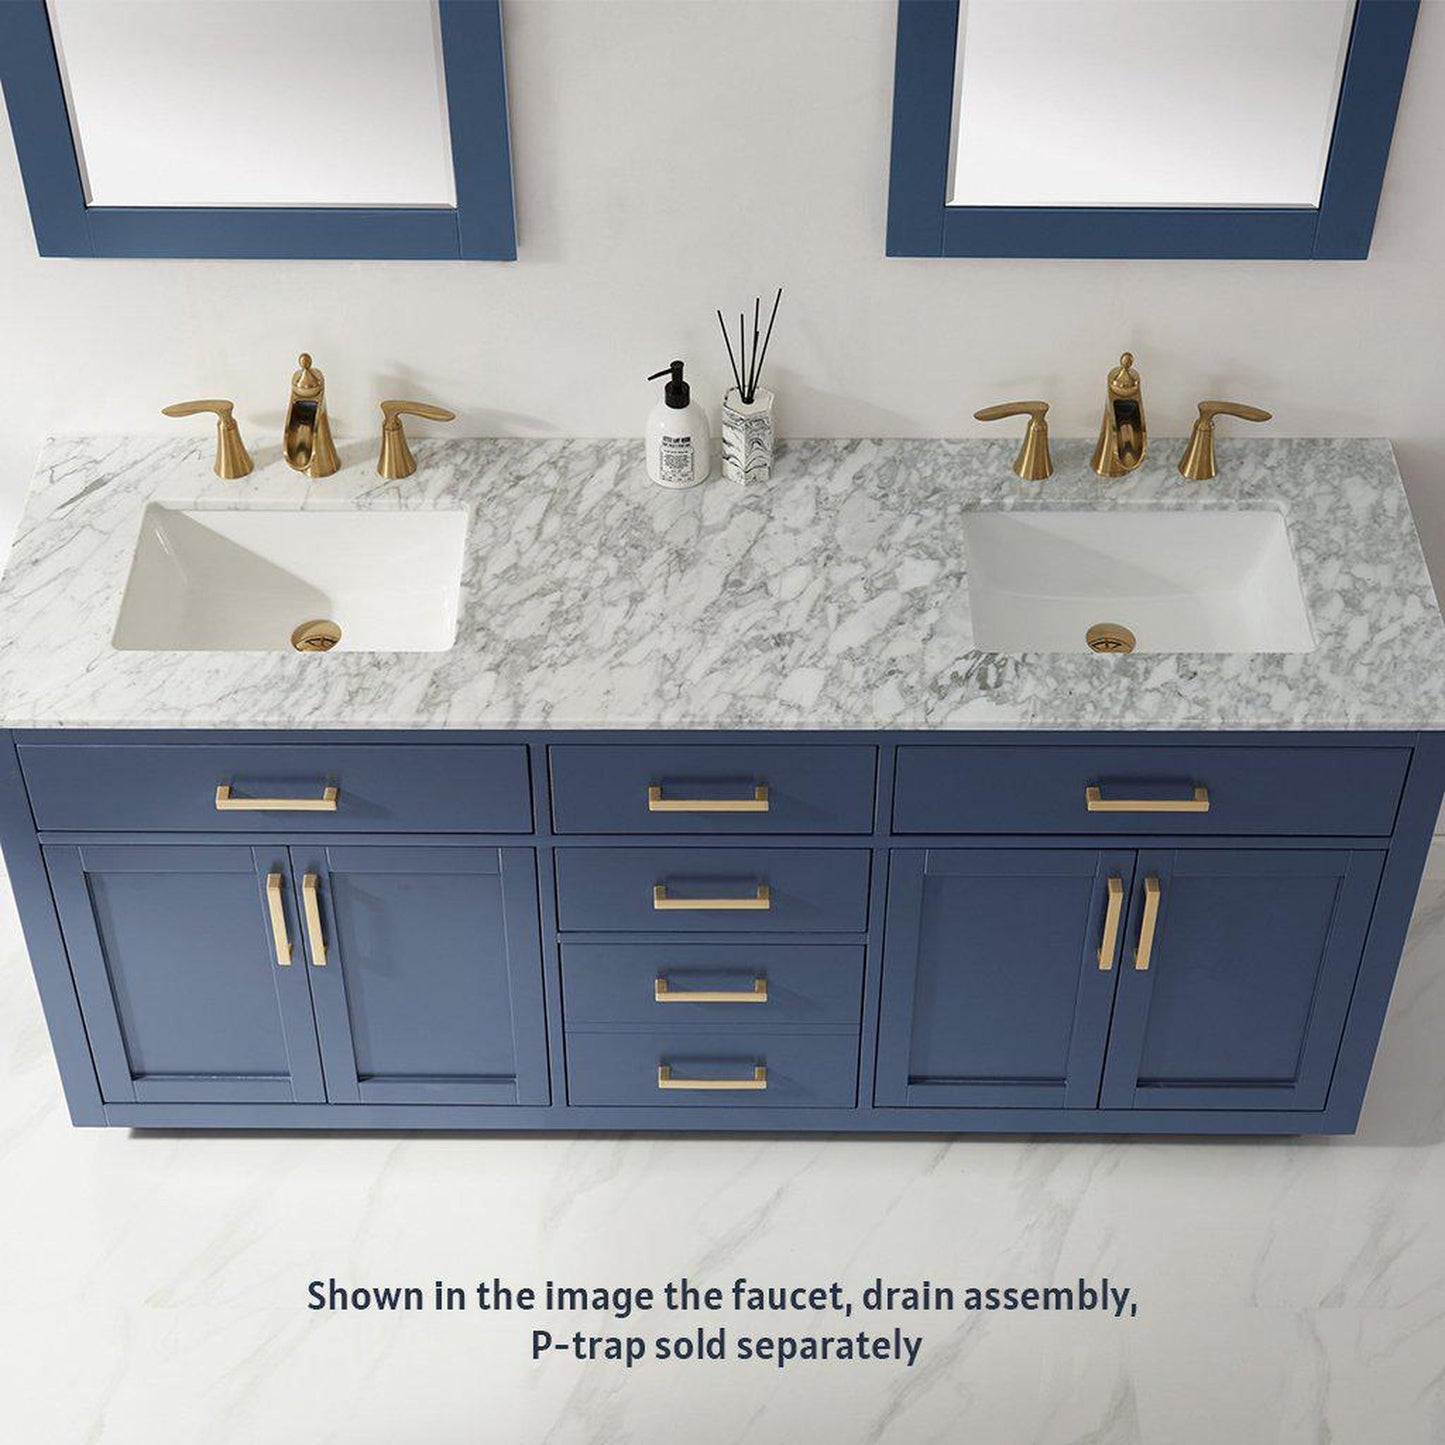 Altair Ivy 72" Double Royal Blue Freestanding Bathroom Vanity Set With Mirror, Natural Carrara White Marble Top, Two Rectangular Undermount Ceramic Sinks, and Overflow